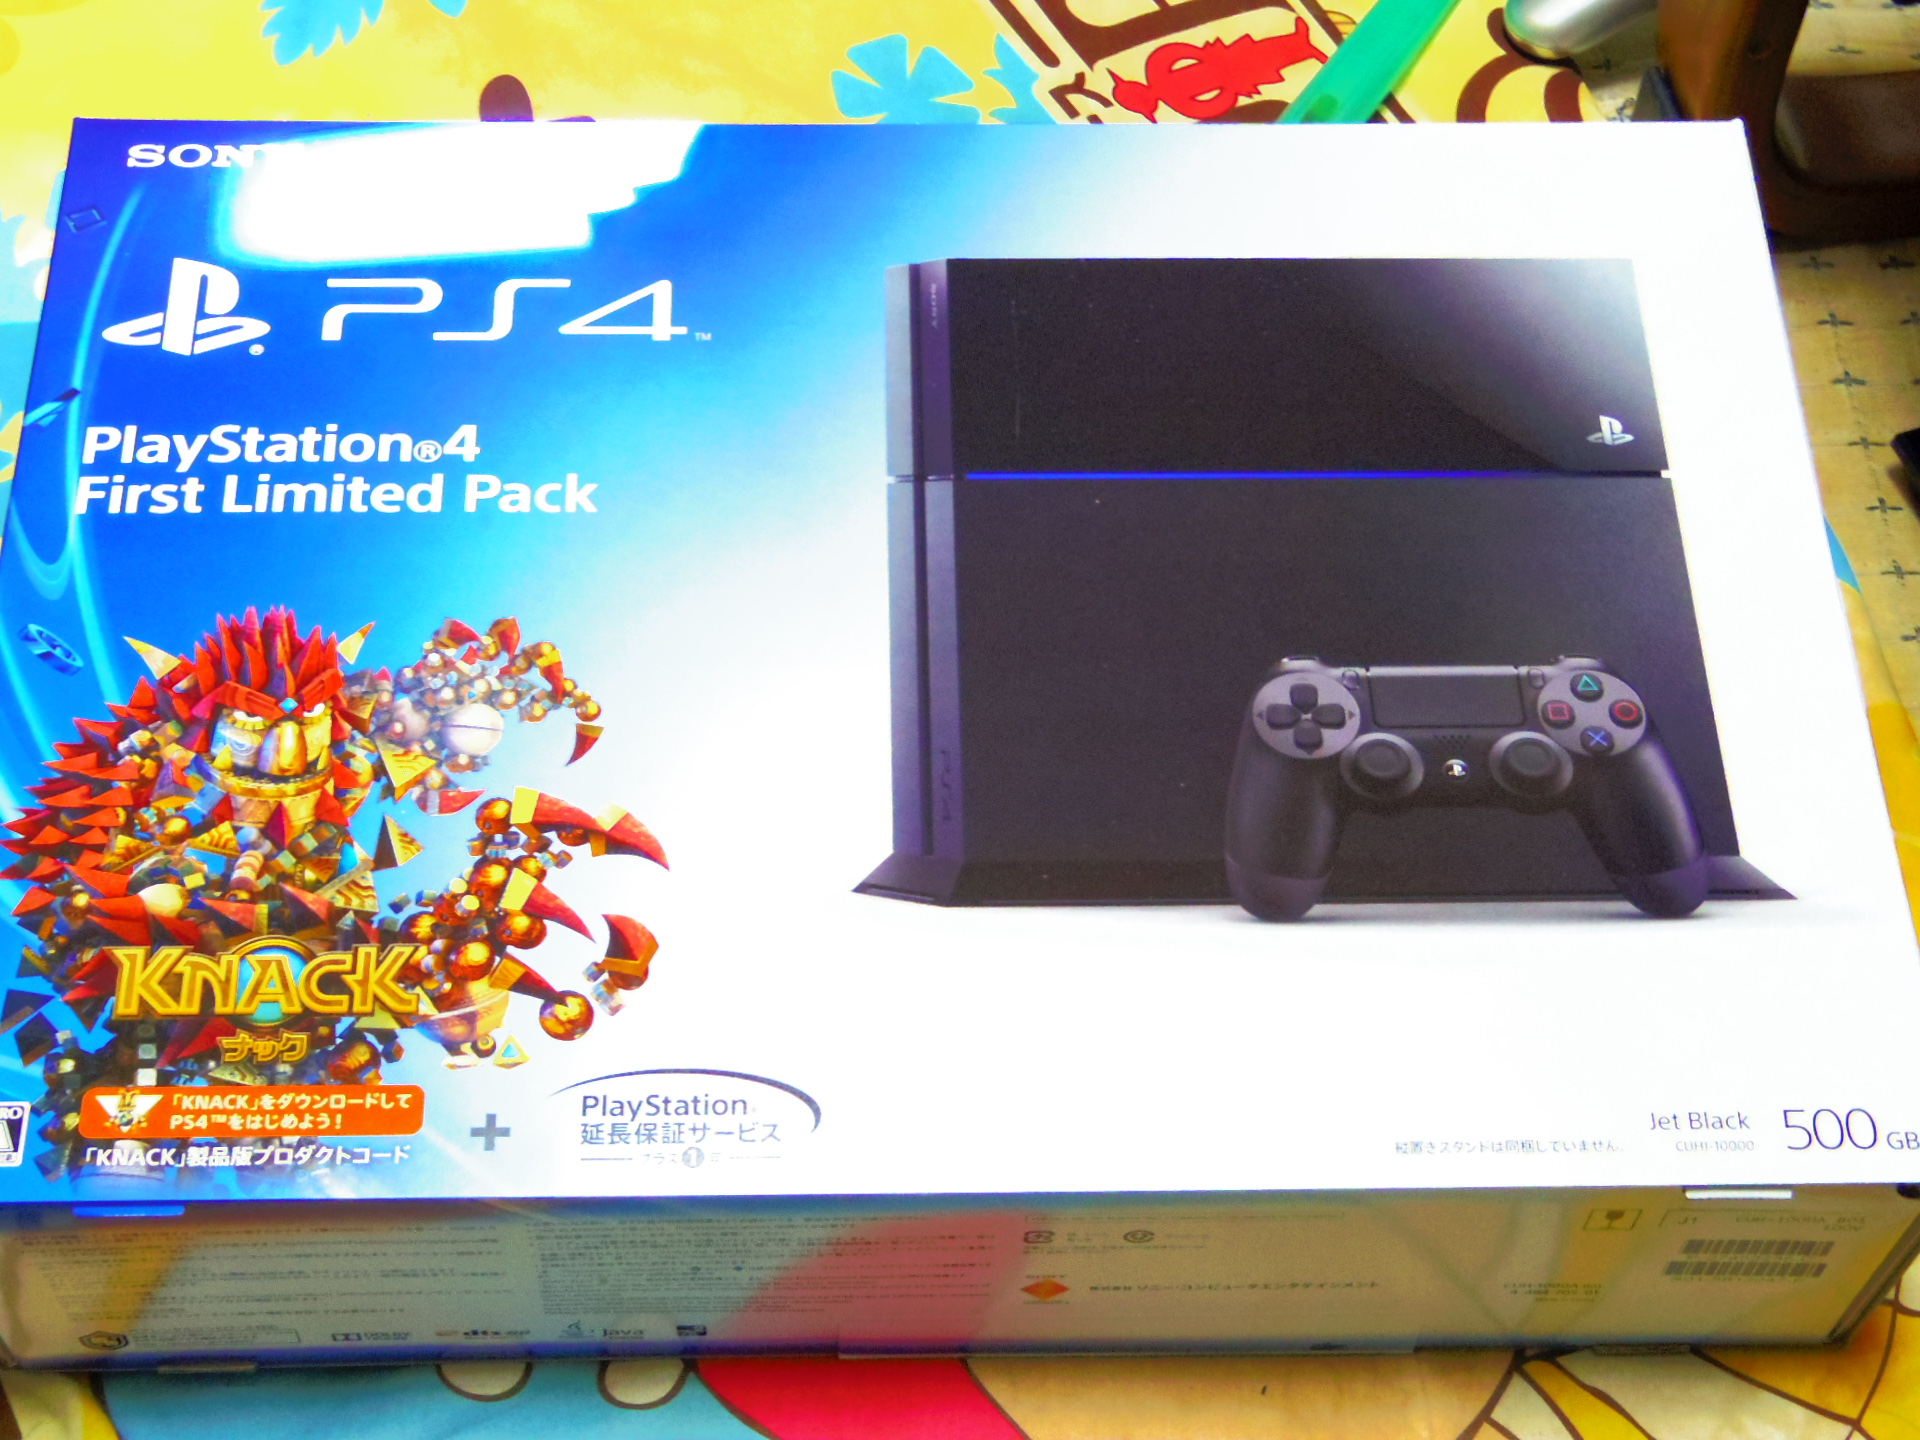 Playstation 4 First Limited Pack